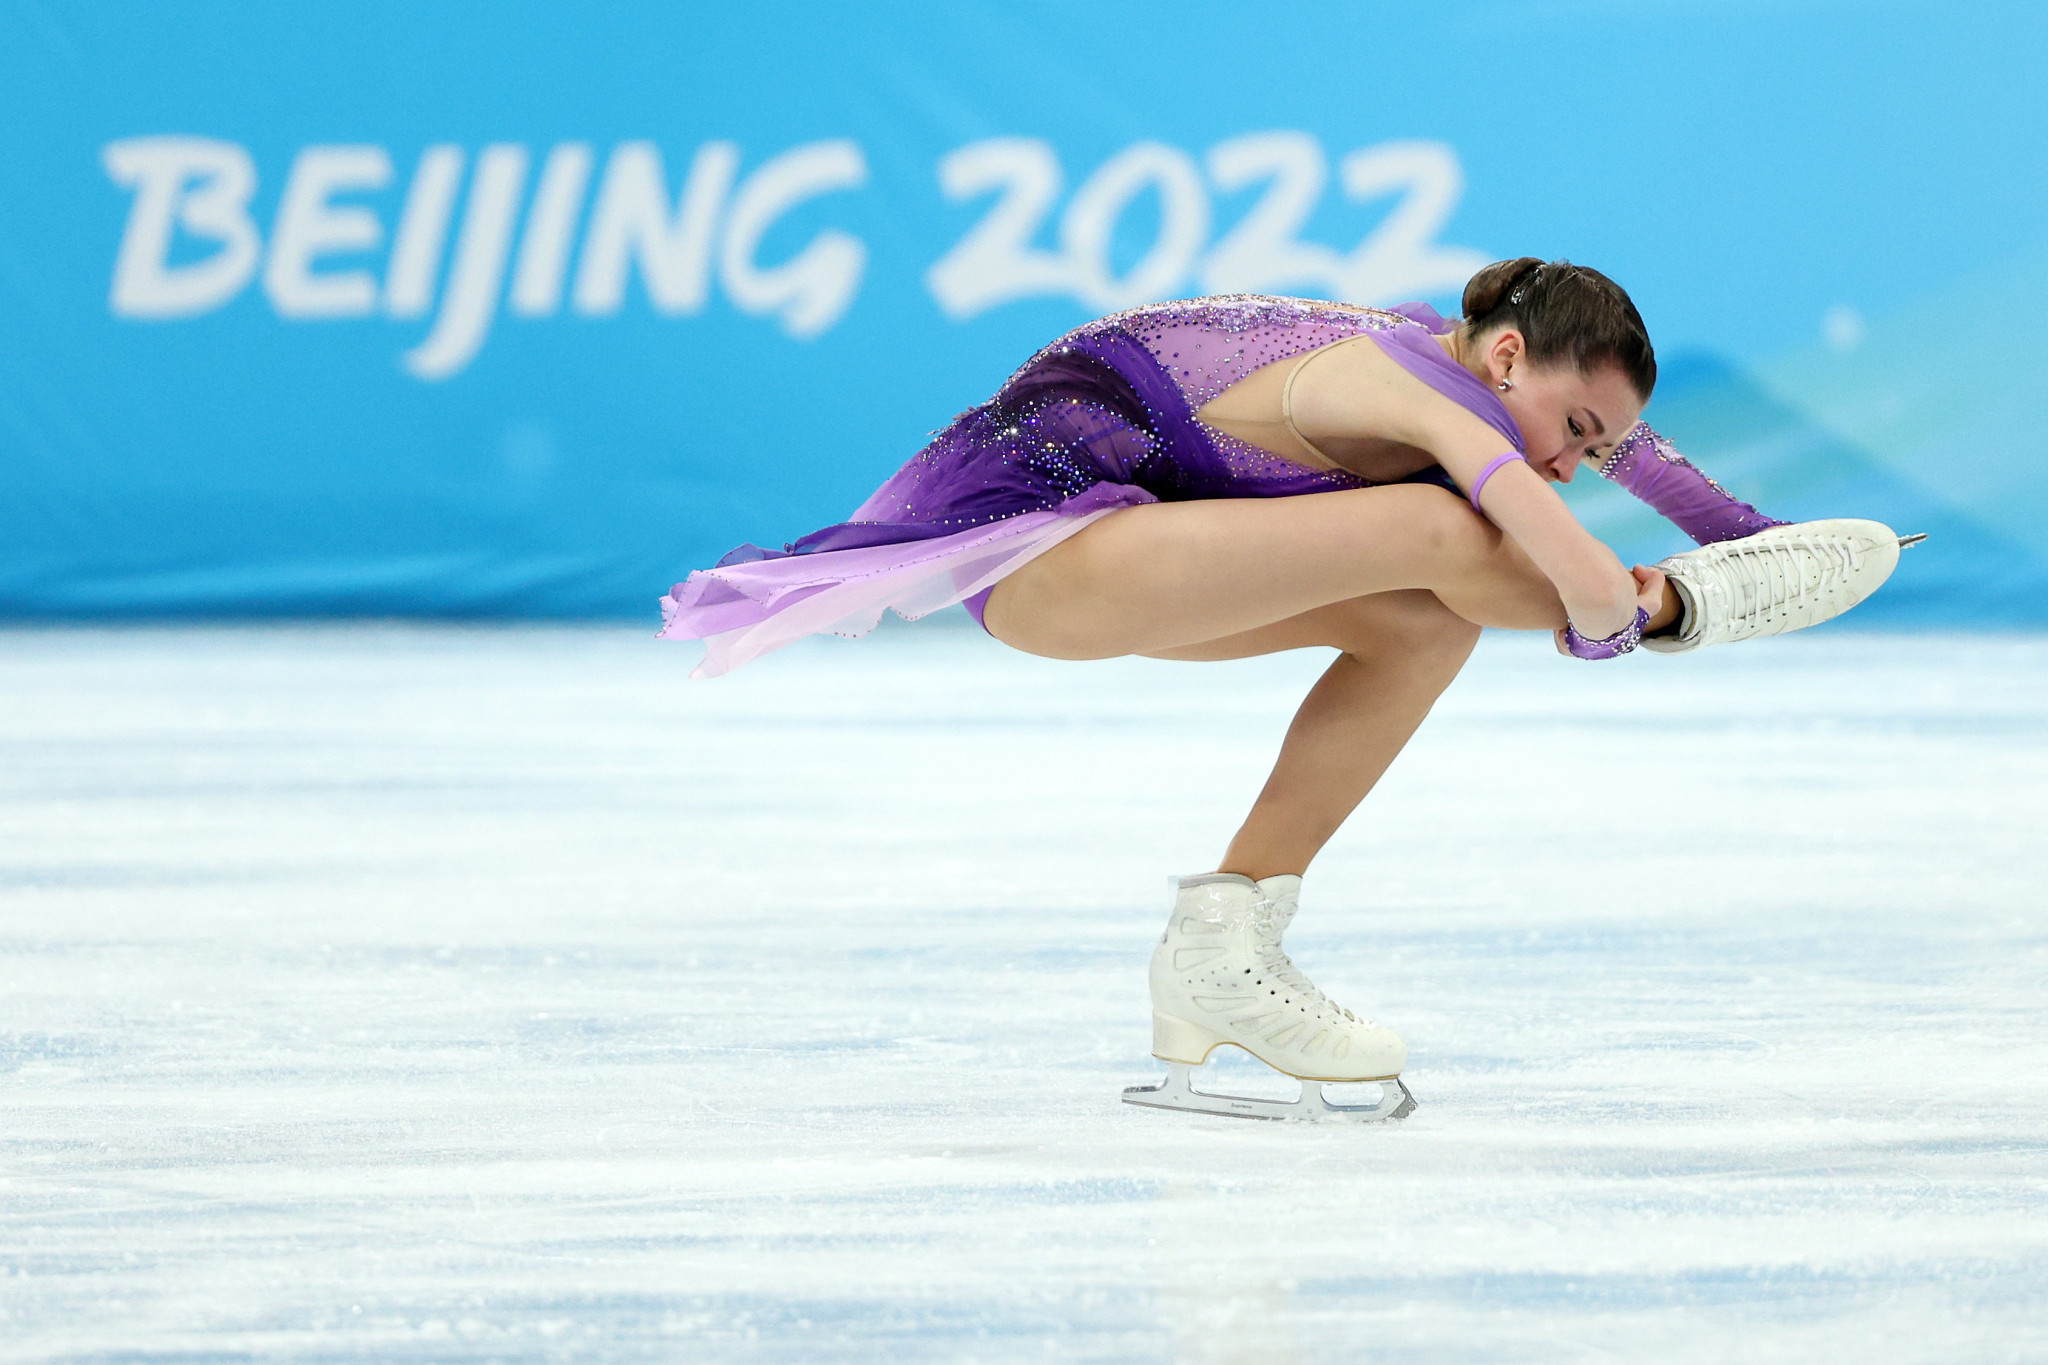 Kamila Valieva's performance was key to the Russian Olympic Committee winning the gold medal in the team event and she will start as favourite in the singles when it starts tomorrow ©Getty Images